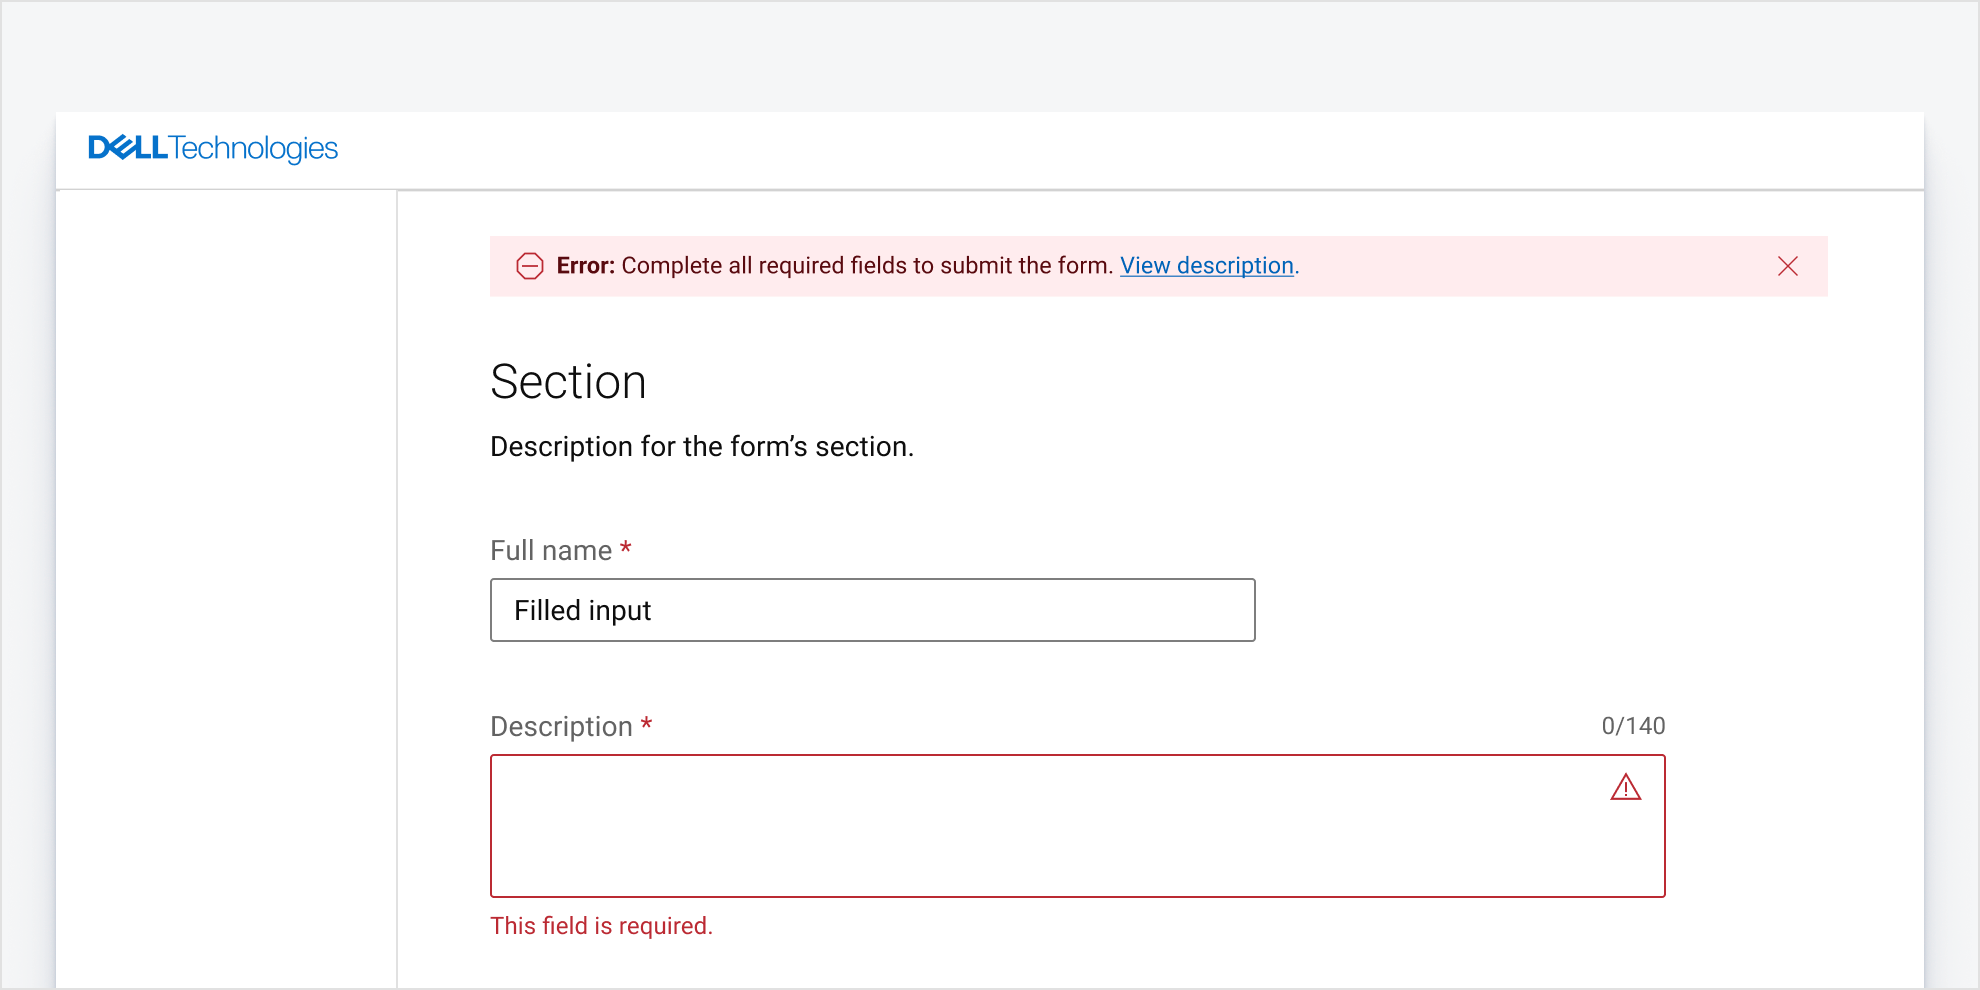 An image showing a message bar” “Complete all required fields to submit the form.”